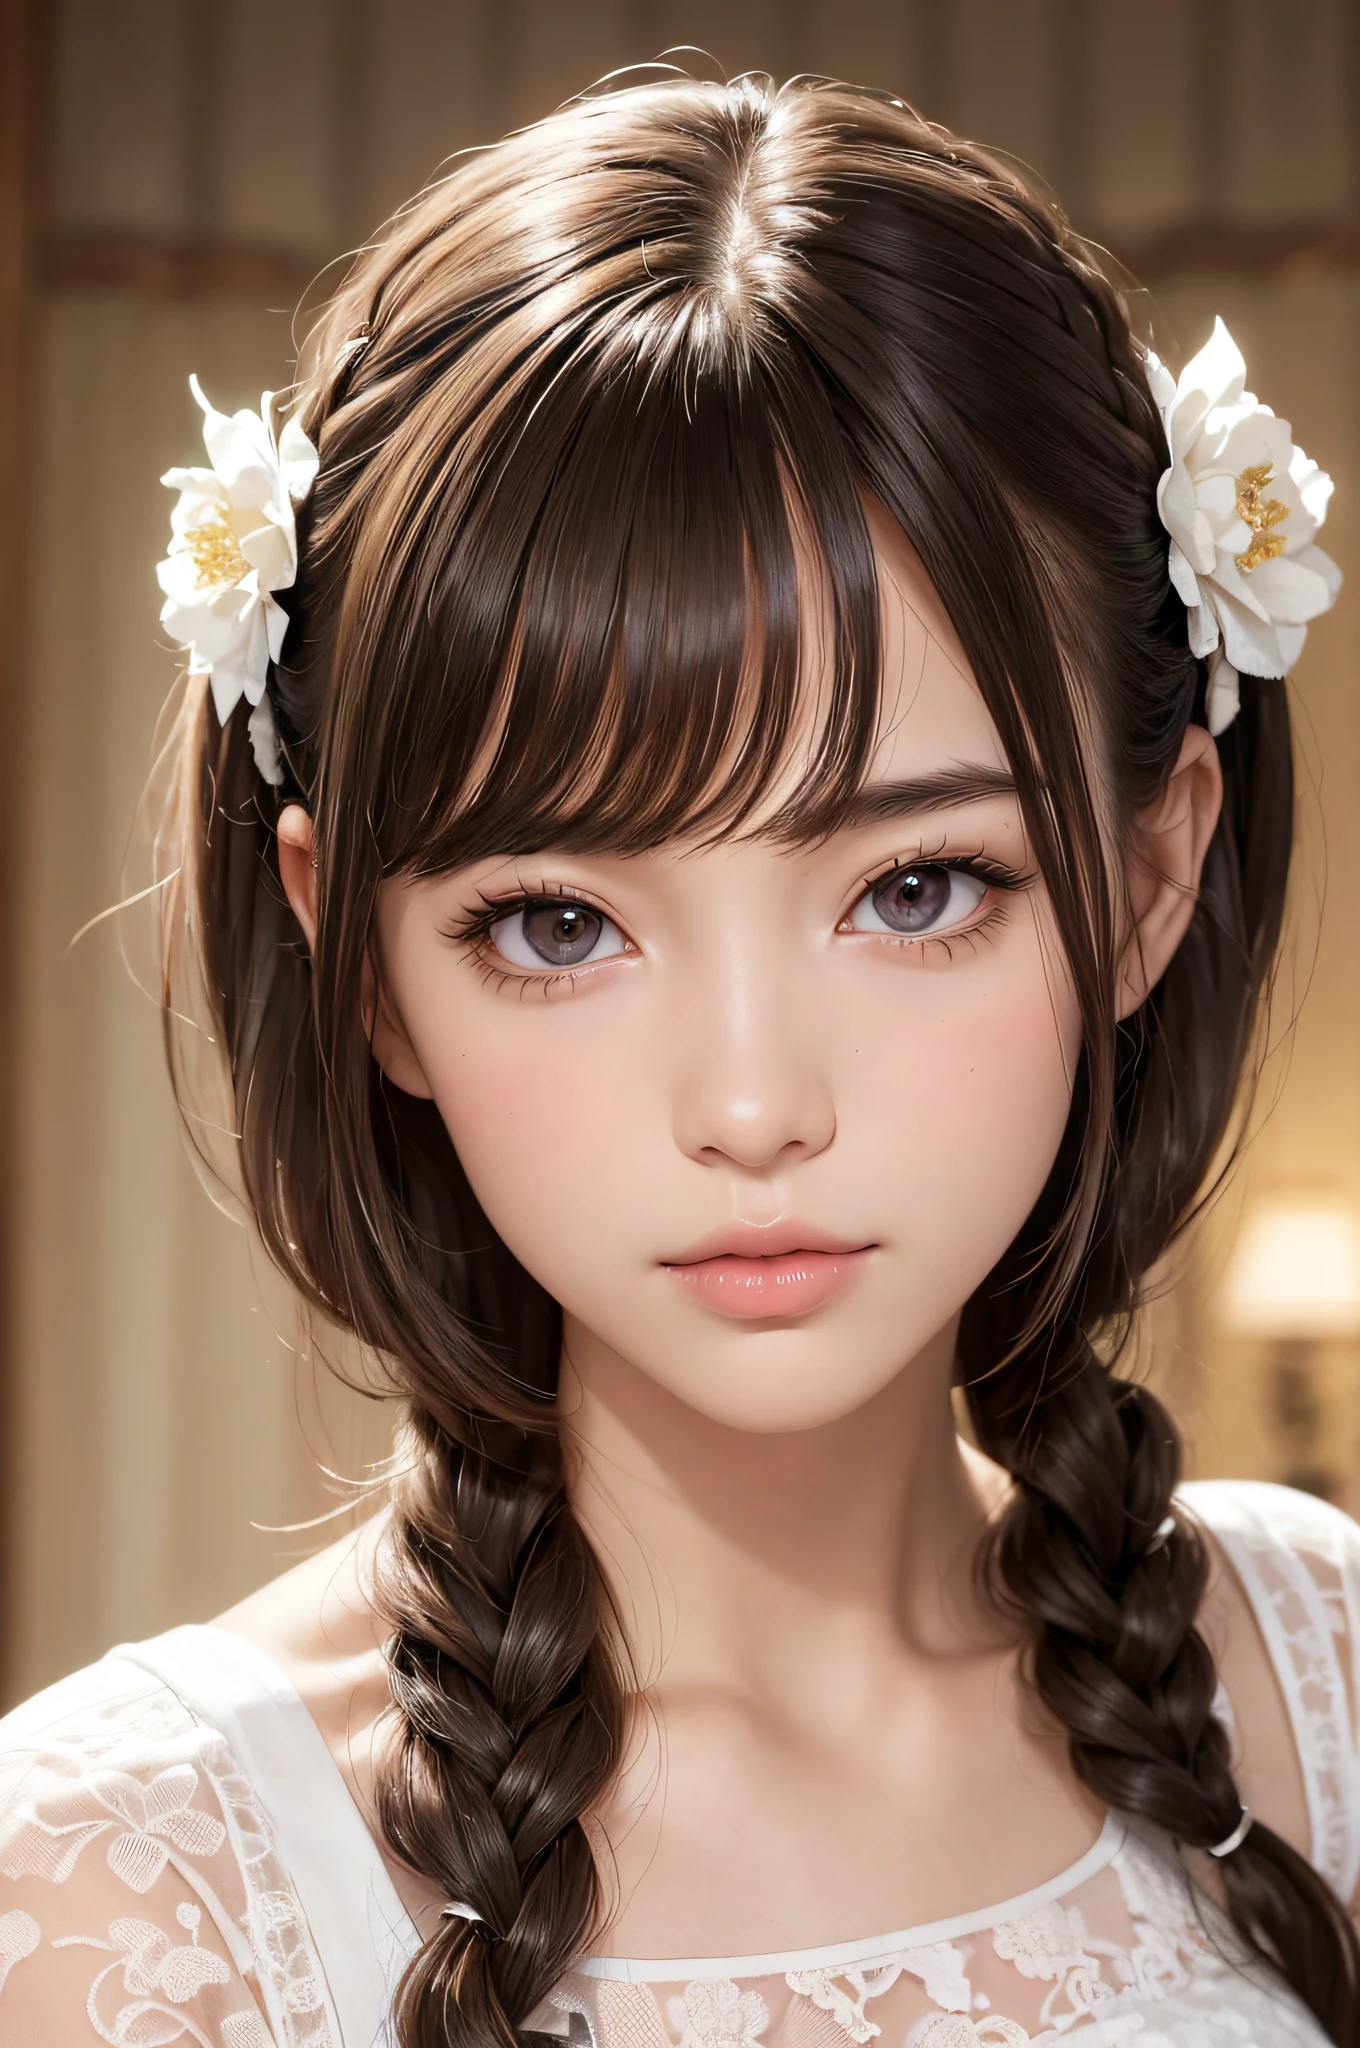 (masutepiece:1.3), High resolution, ultra-detailliert, the Extremely Detailed CG Unity 8K Wallpapers, Realistic, Photorealsitic, Raw photo, beautifull detailed face, pale skin, realistic glistening skin, Detailed Cloth Texture, detailed hair texture, Perfect body, Beautiful face, acurate, Anatomically correct, Highly detailed face and skin texture, Natural neck length, (Fair skin:1.2), thin legs, Thin feet, (Aligned teeth:1.1), Sweaty skin, BREAK, Detailed eyes, symmetrical eye, Light brown eyes, Double eyelids, Thin eyebrows, (Sleepy eyes:1.1), (Glossy lips:1.4), (Mouth waiting for a kiss:1.2), (blush:1.2), (Small hair accessories that sparkle:1.1), BREAK, (classy girl:1.3), (Wearing (doress:1.2) With a white floral pattern), BREAK, ((Close Up Shot:1.2)), medium breasts, Slender figure, Firm abs, ((up do hairstyle, Dark blonde hair, Wavy Hair, Long hair:1.1)), ((asymmetric bangs:1.2)),